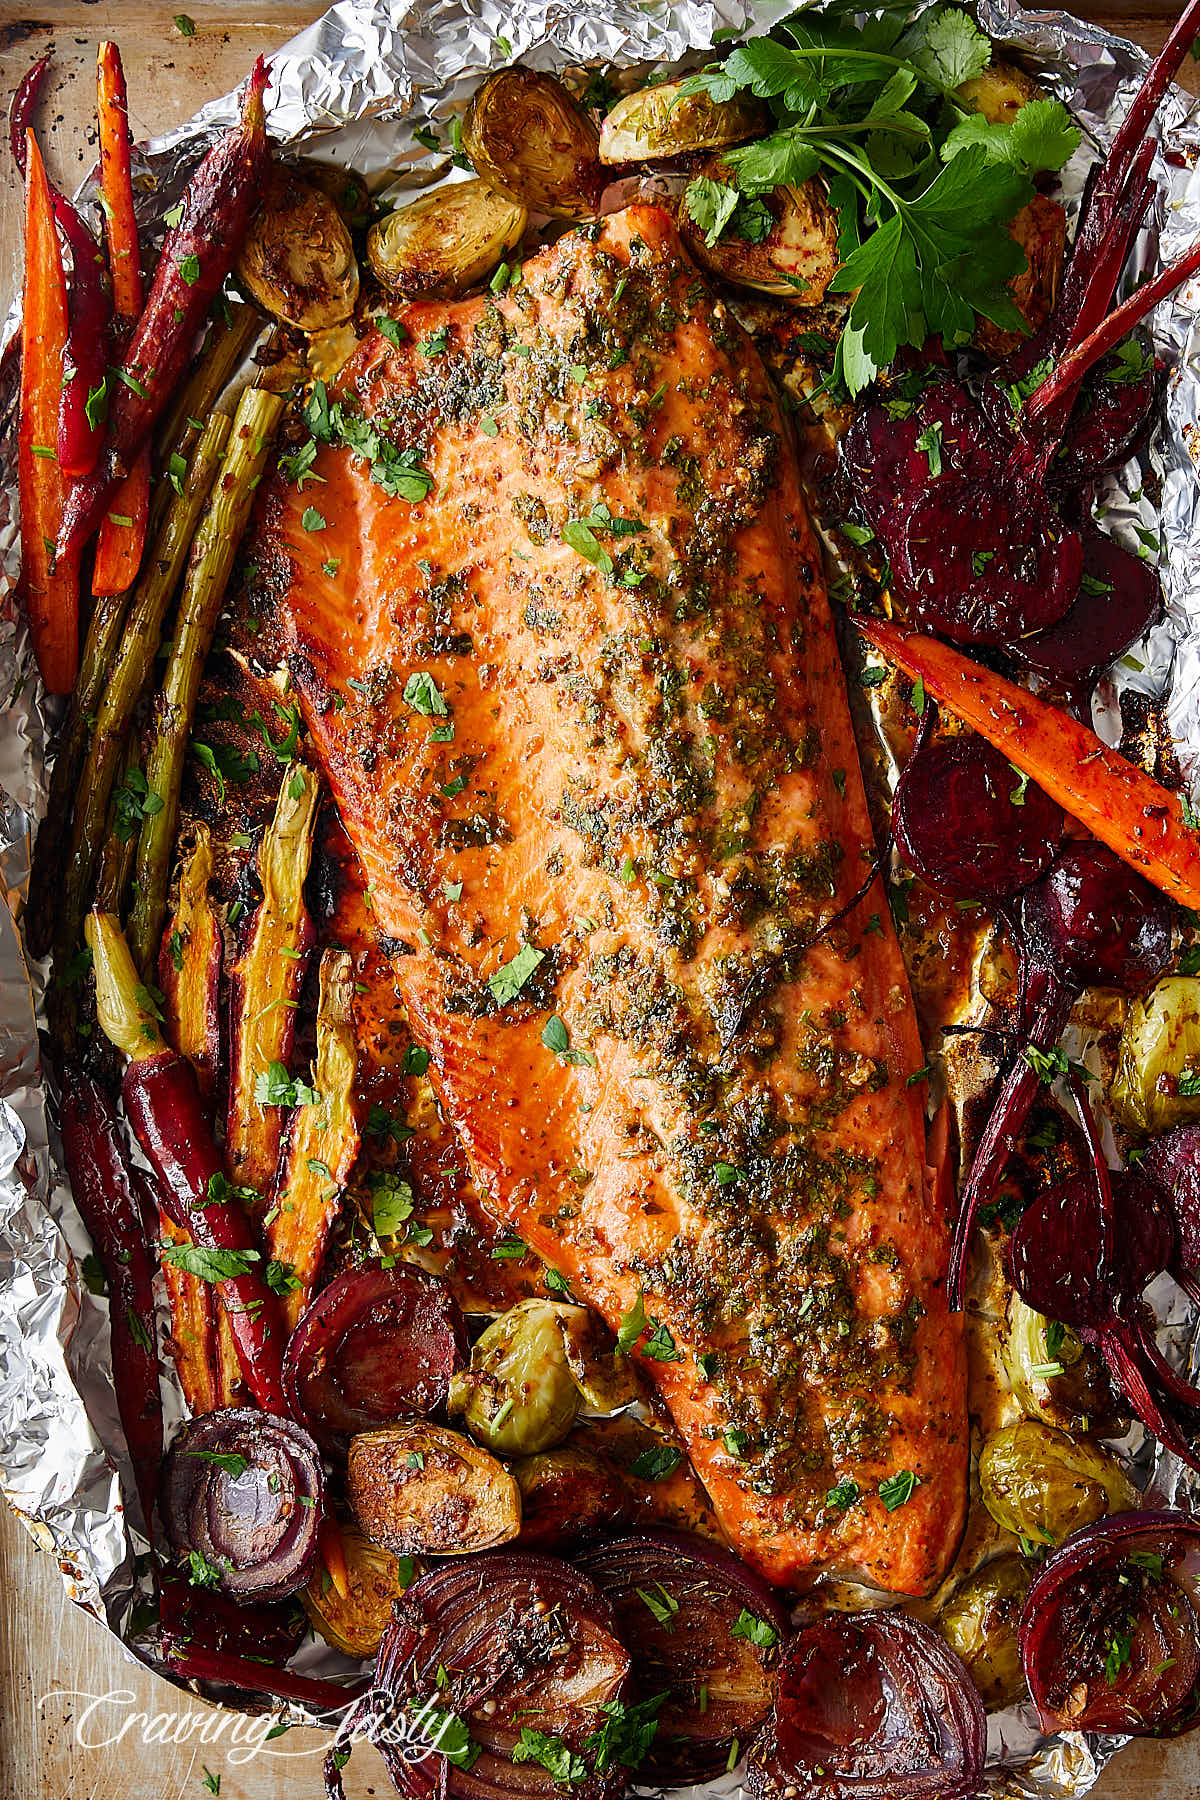 Steelhead trout filet on a piece of foil surrounded by roasted vegetables.